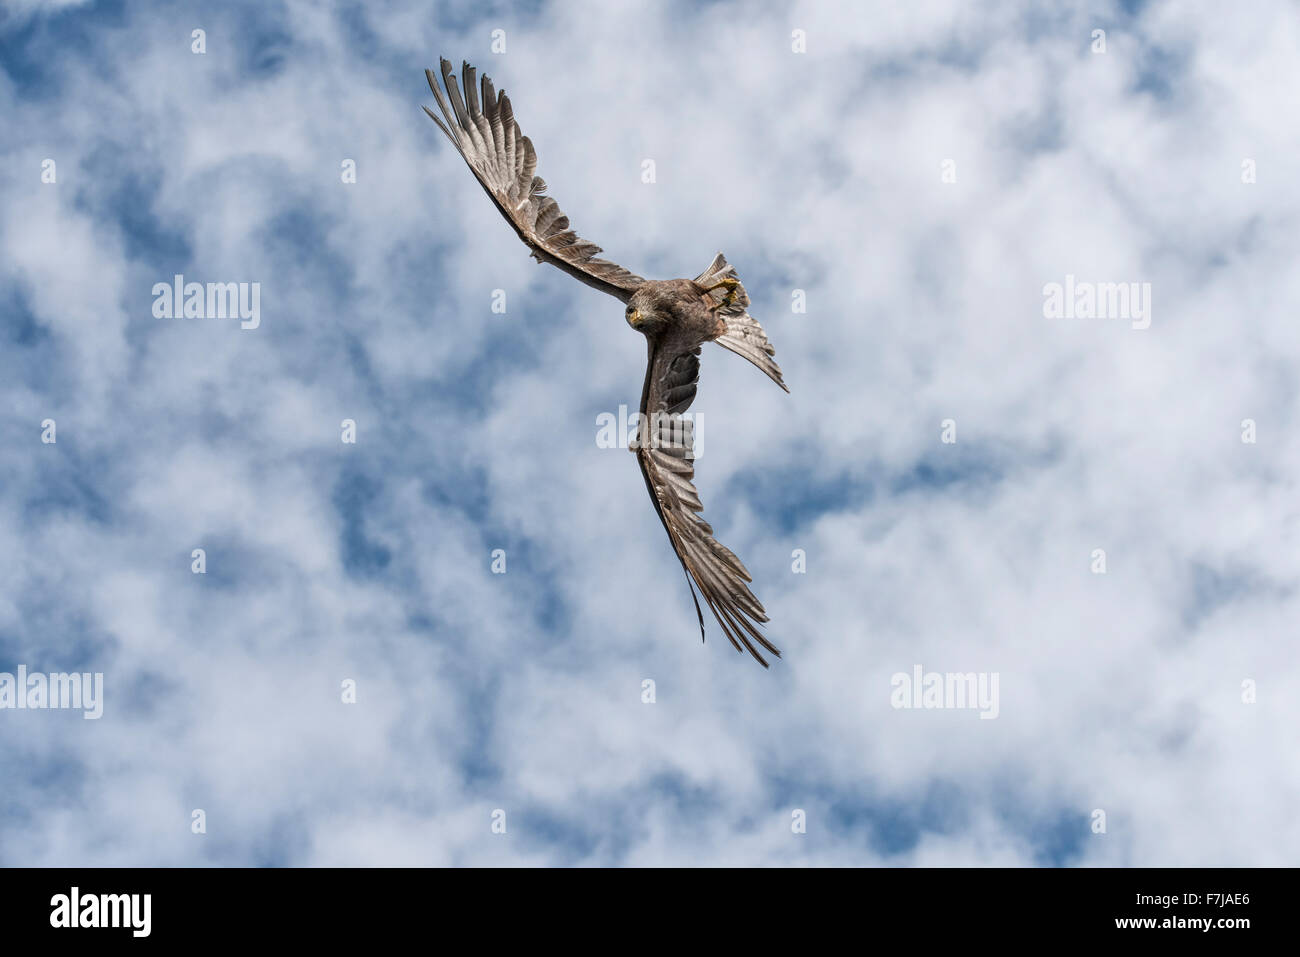 A Red Kite bird of prey dives down from the sky. This must be the view that the prey sees just as its too late to react. Stock Photo